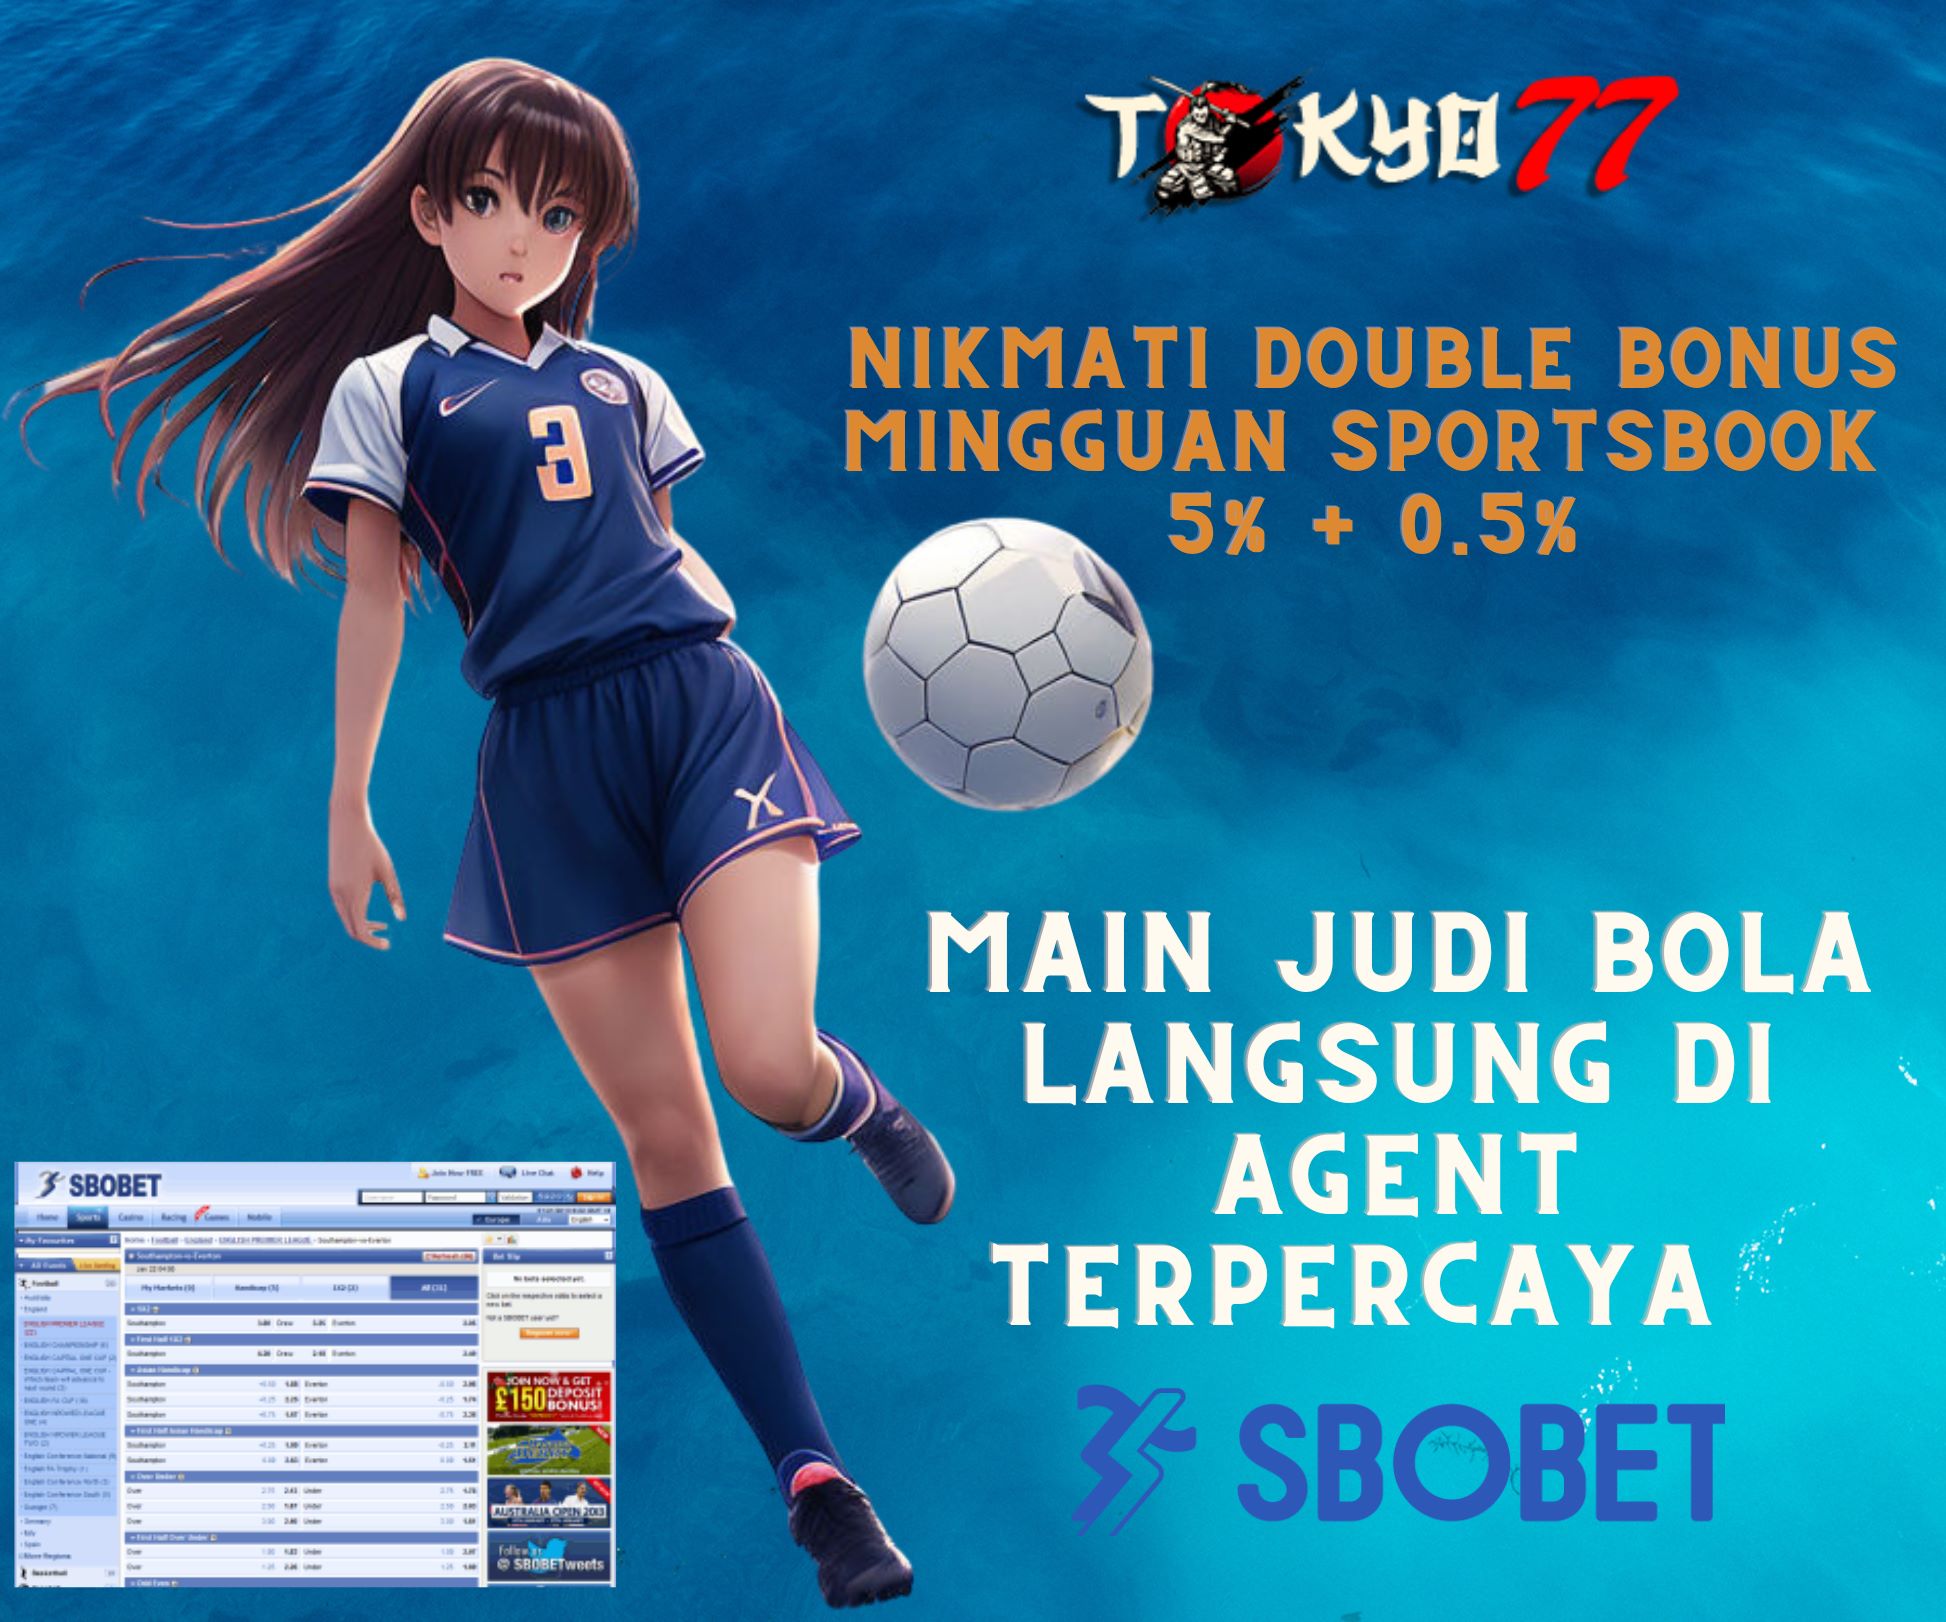 Bet on your favorite football team at the SBOBET agent